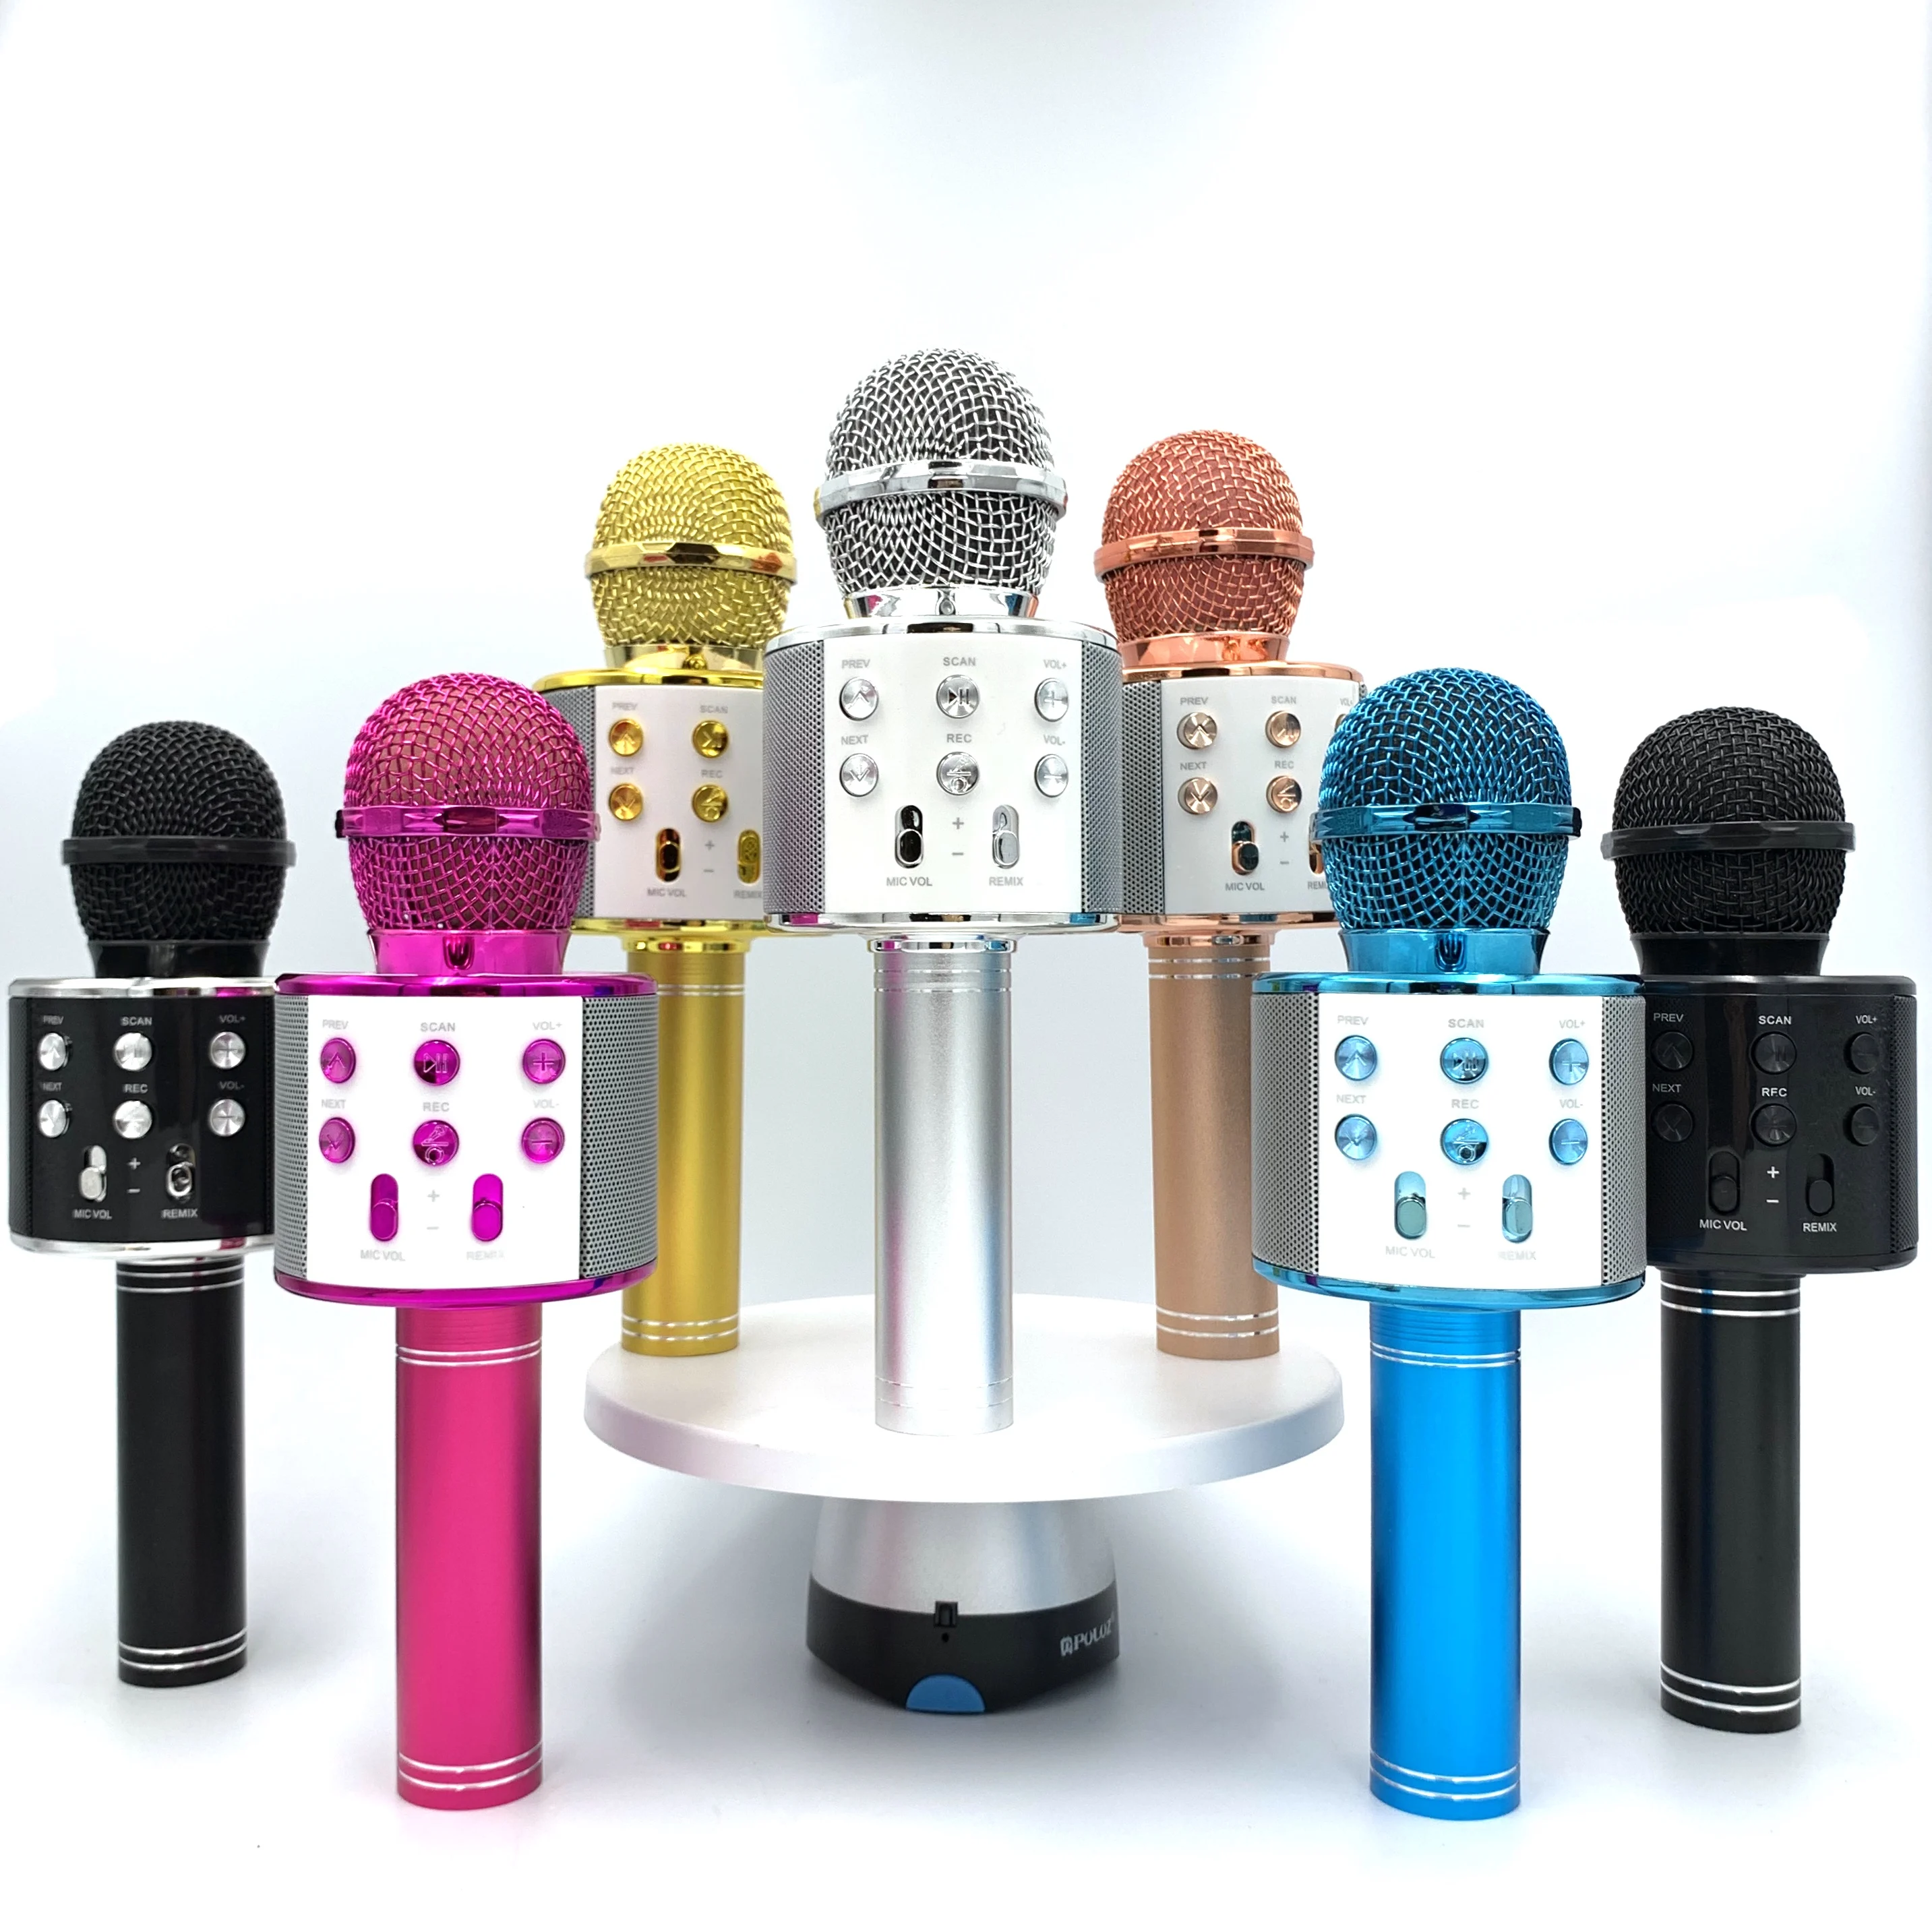 

Wireless home microphone WS858 Portable Handheld Karaoke Player for Home Party KTV Music Singing Playing mobile phone karaoke, Black blue pink gold pink rose gold